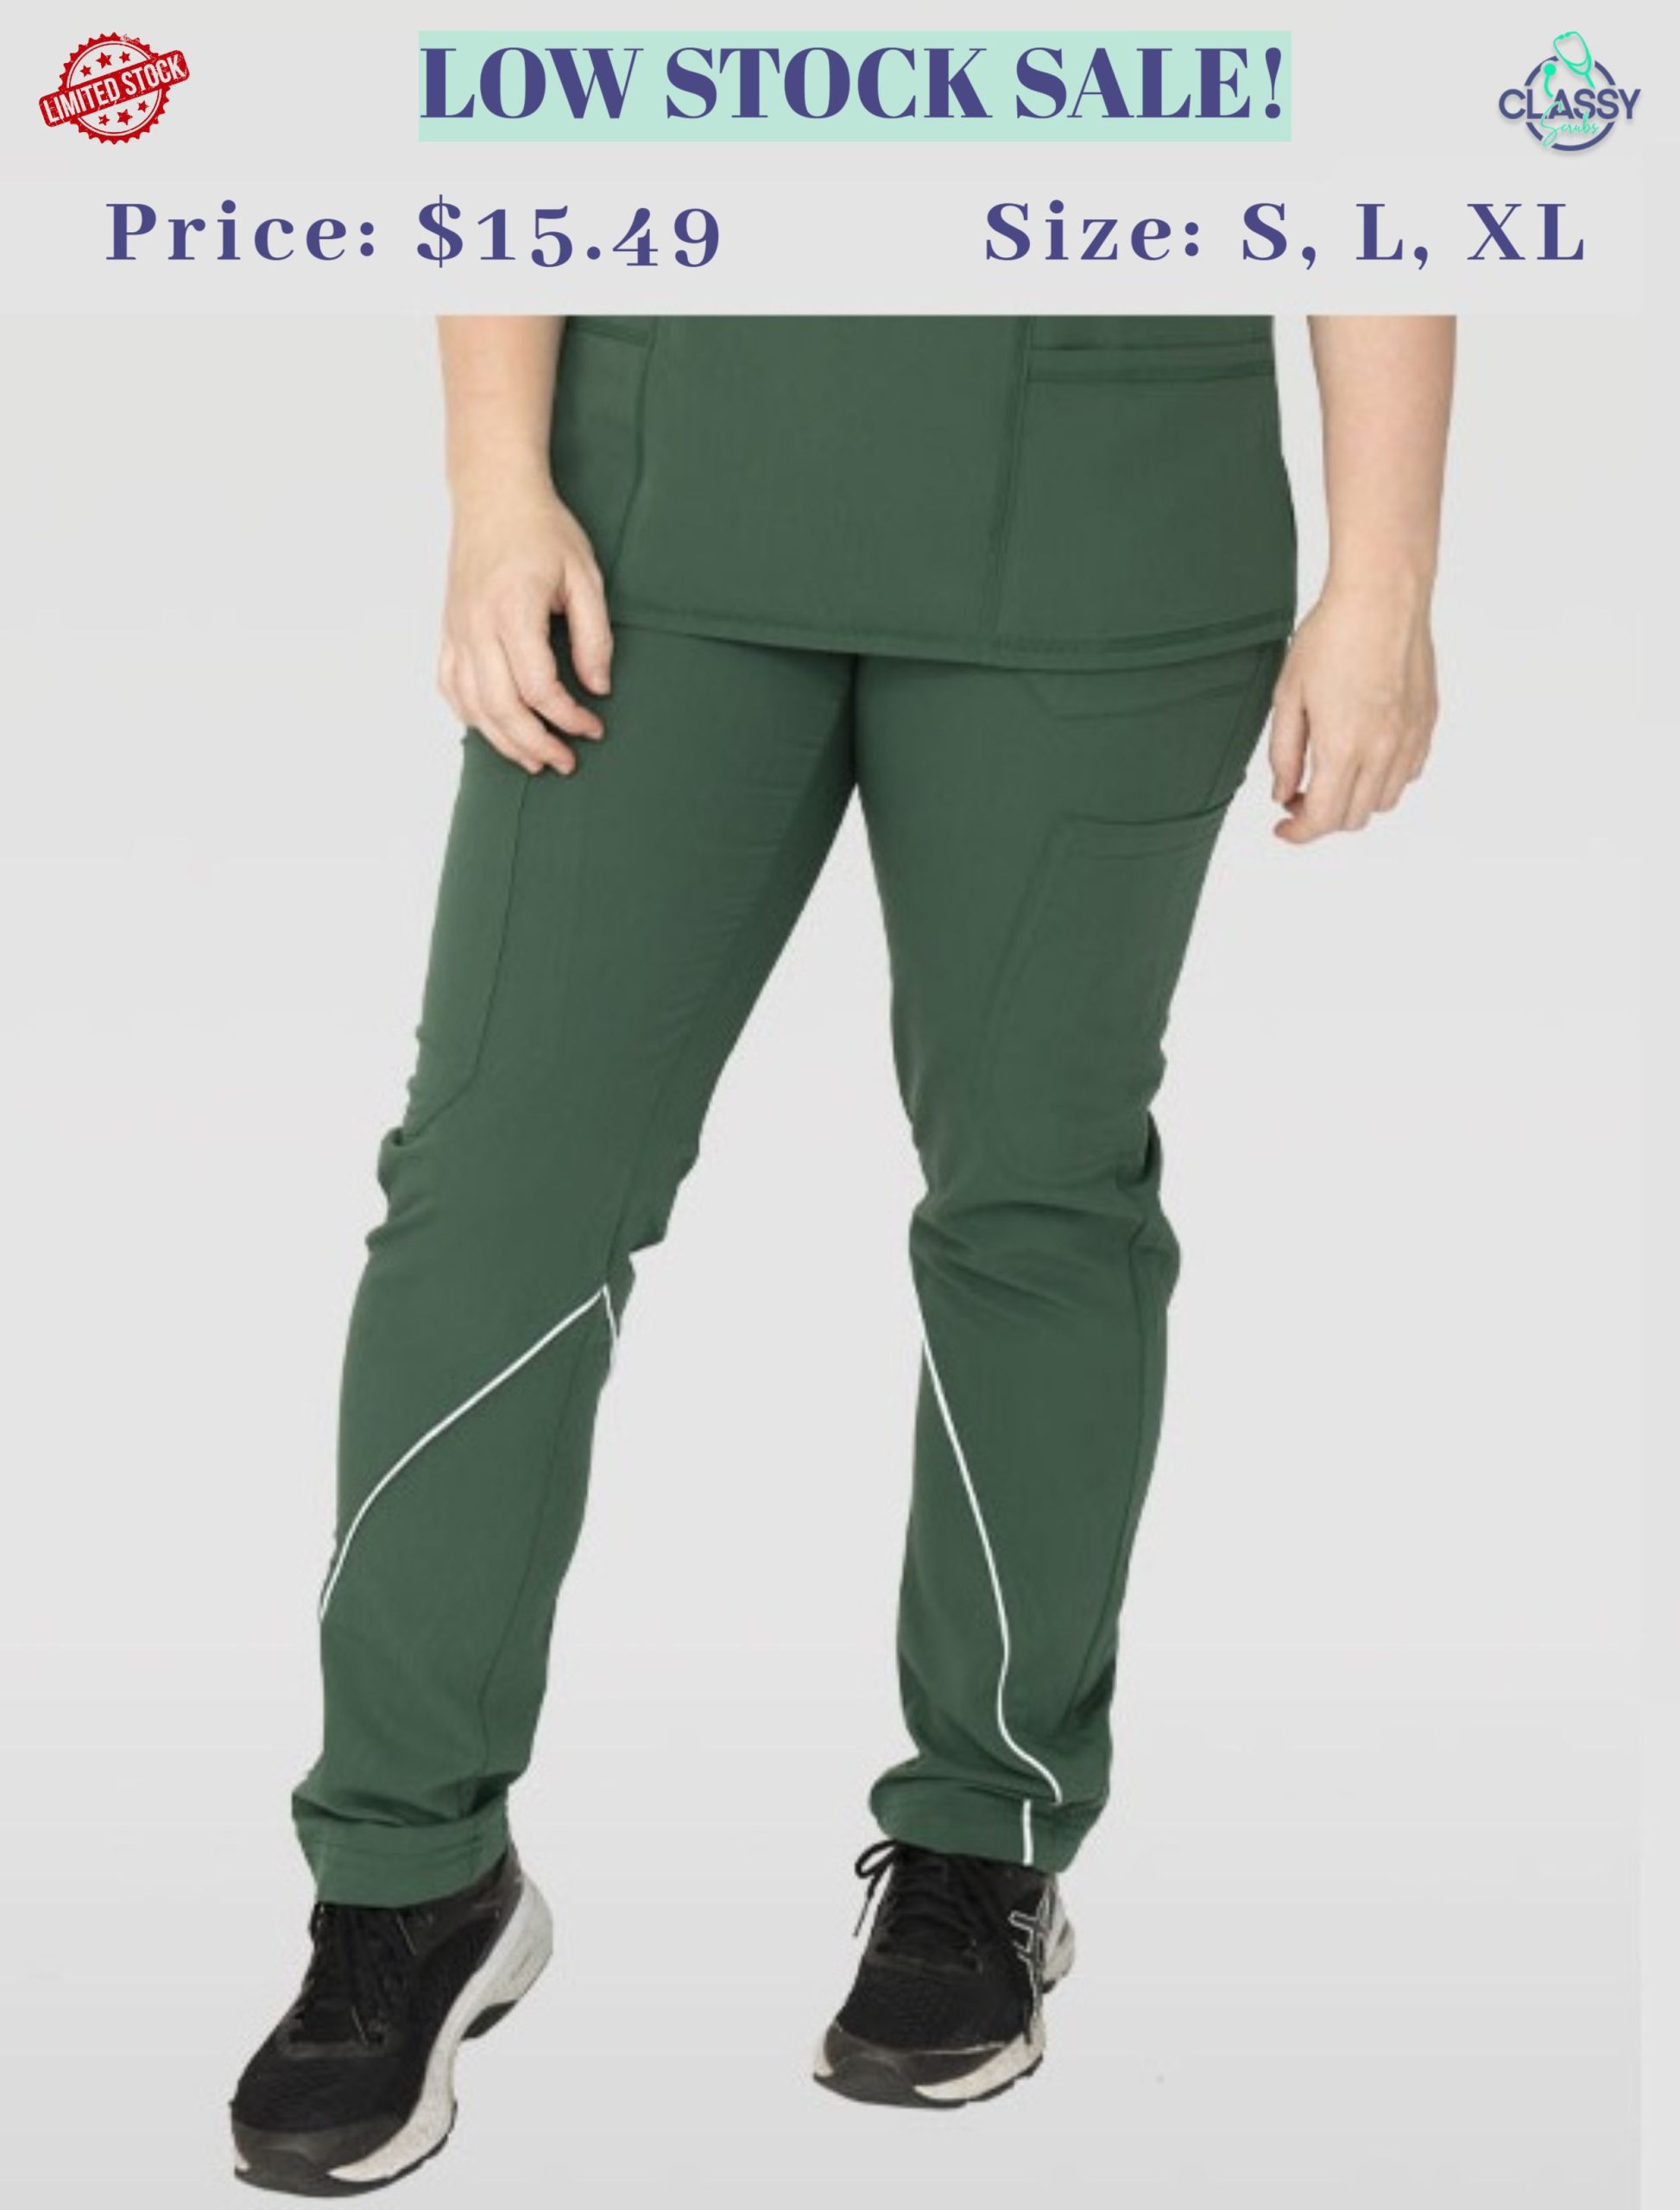 Nurse Pants with Reflect Tape